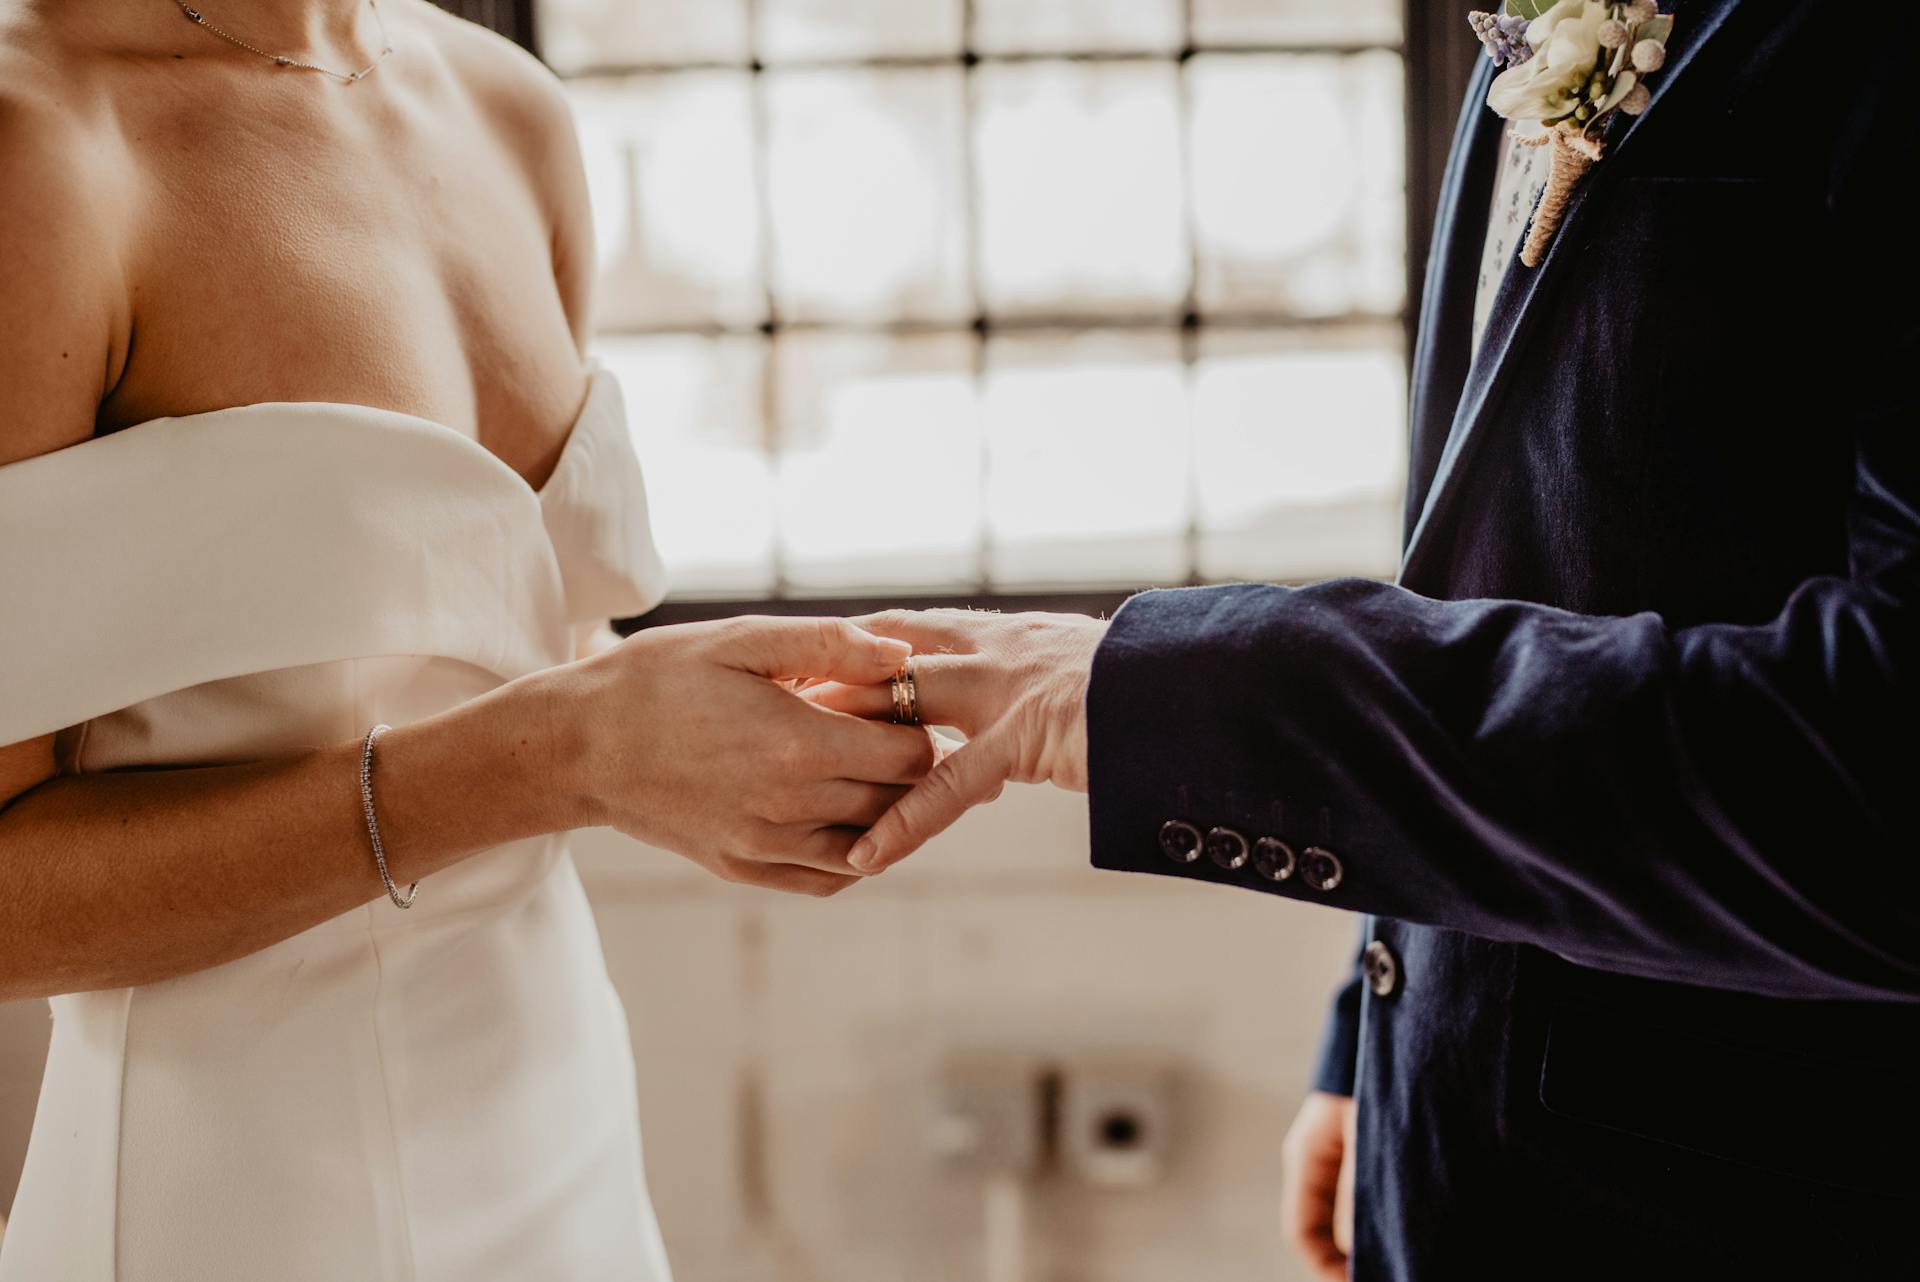 A couple exchanging vows | Source: Pexels